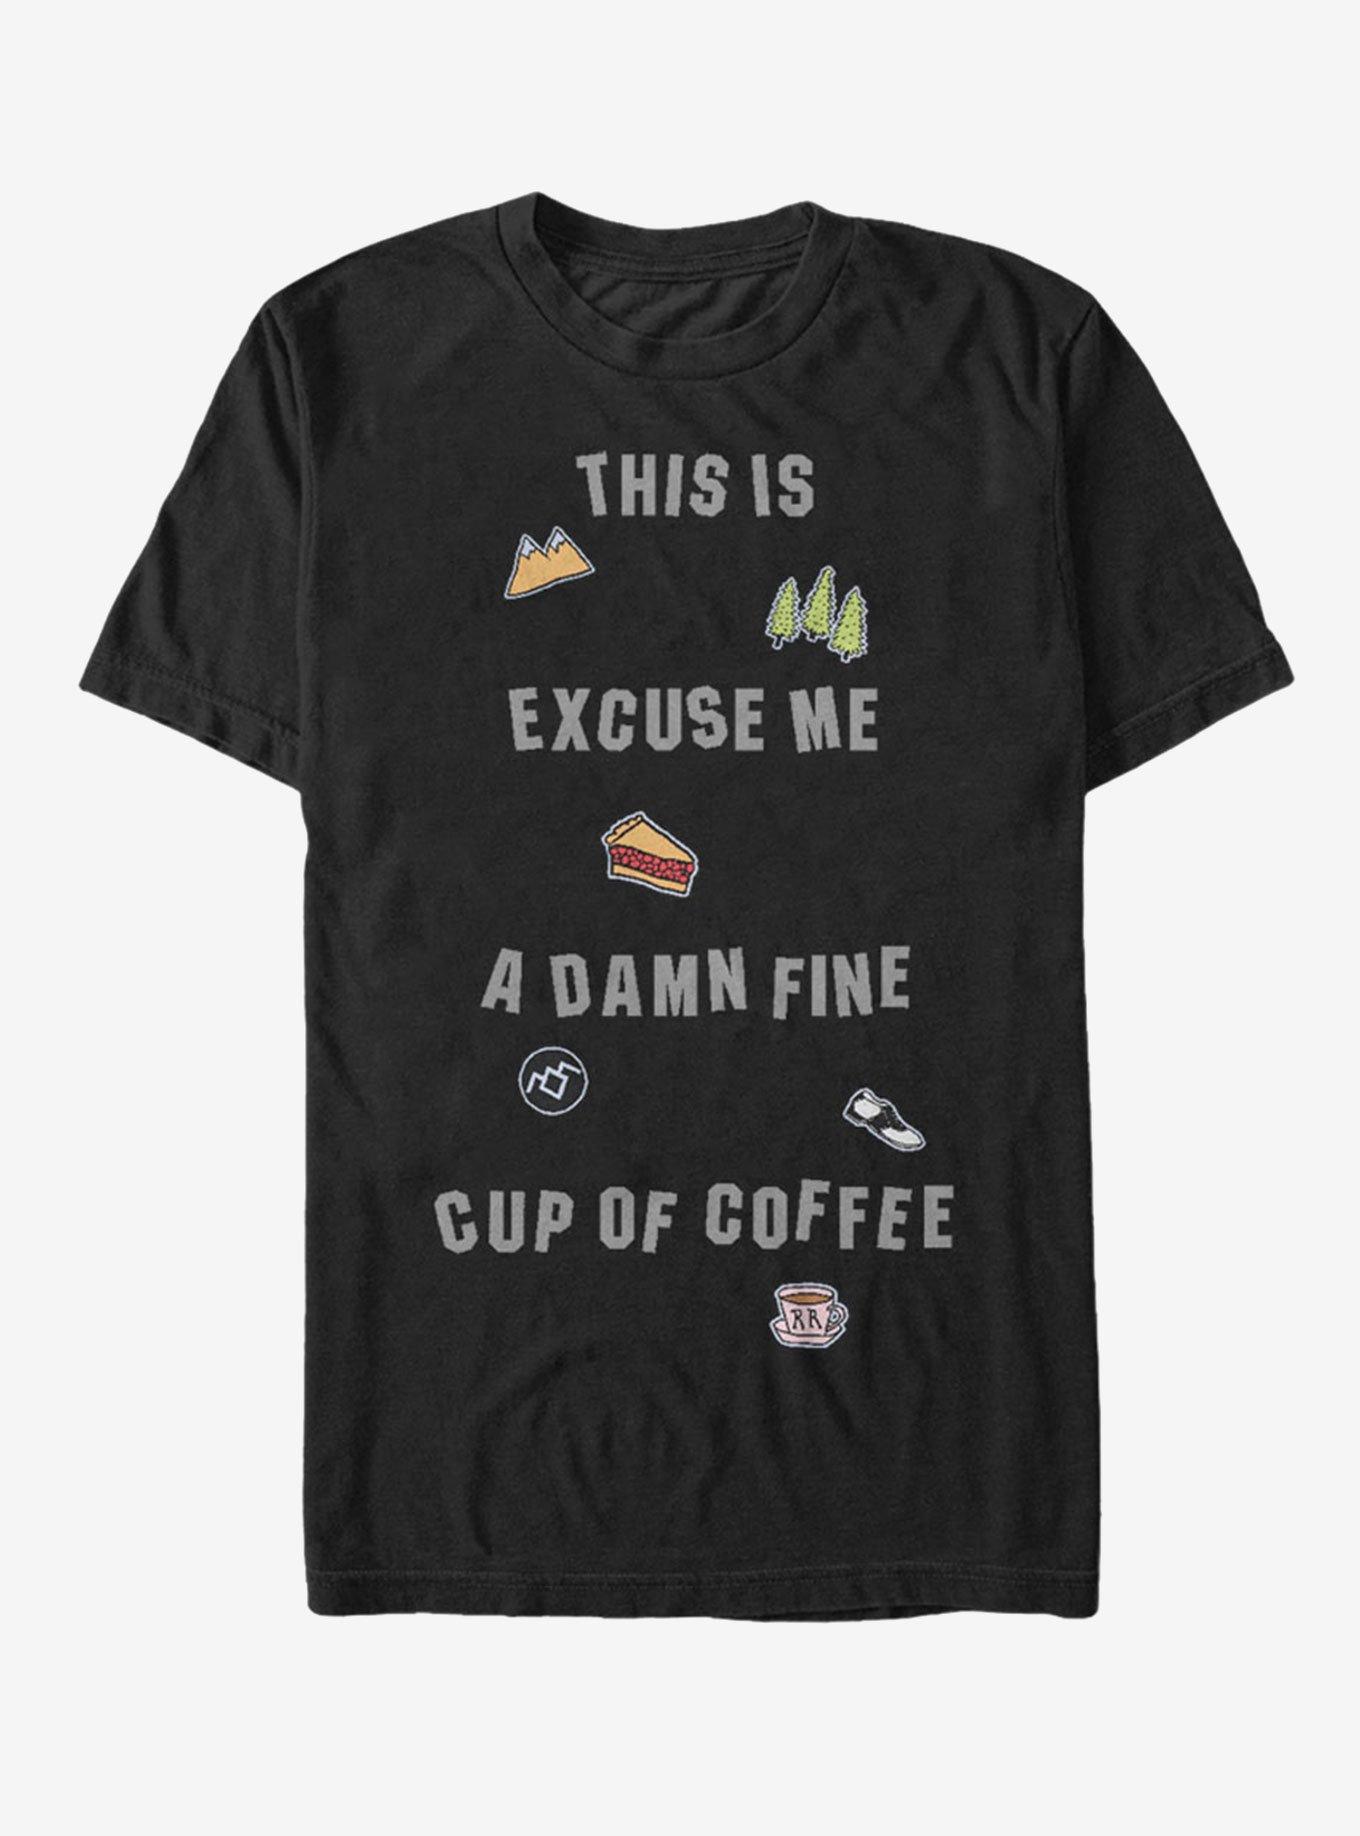 Twin Peaks Fine Cup of Coffee T-Shirt, BLACK, hi-res